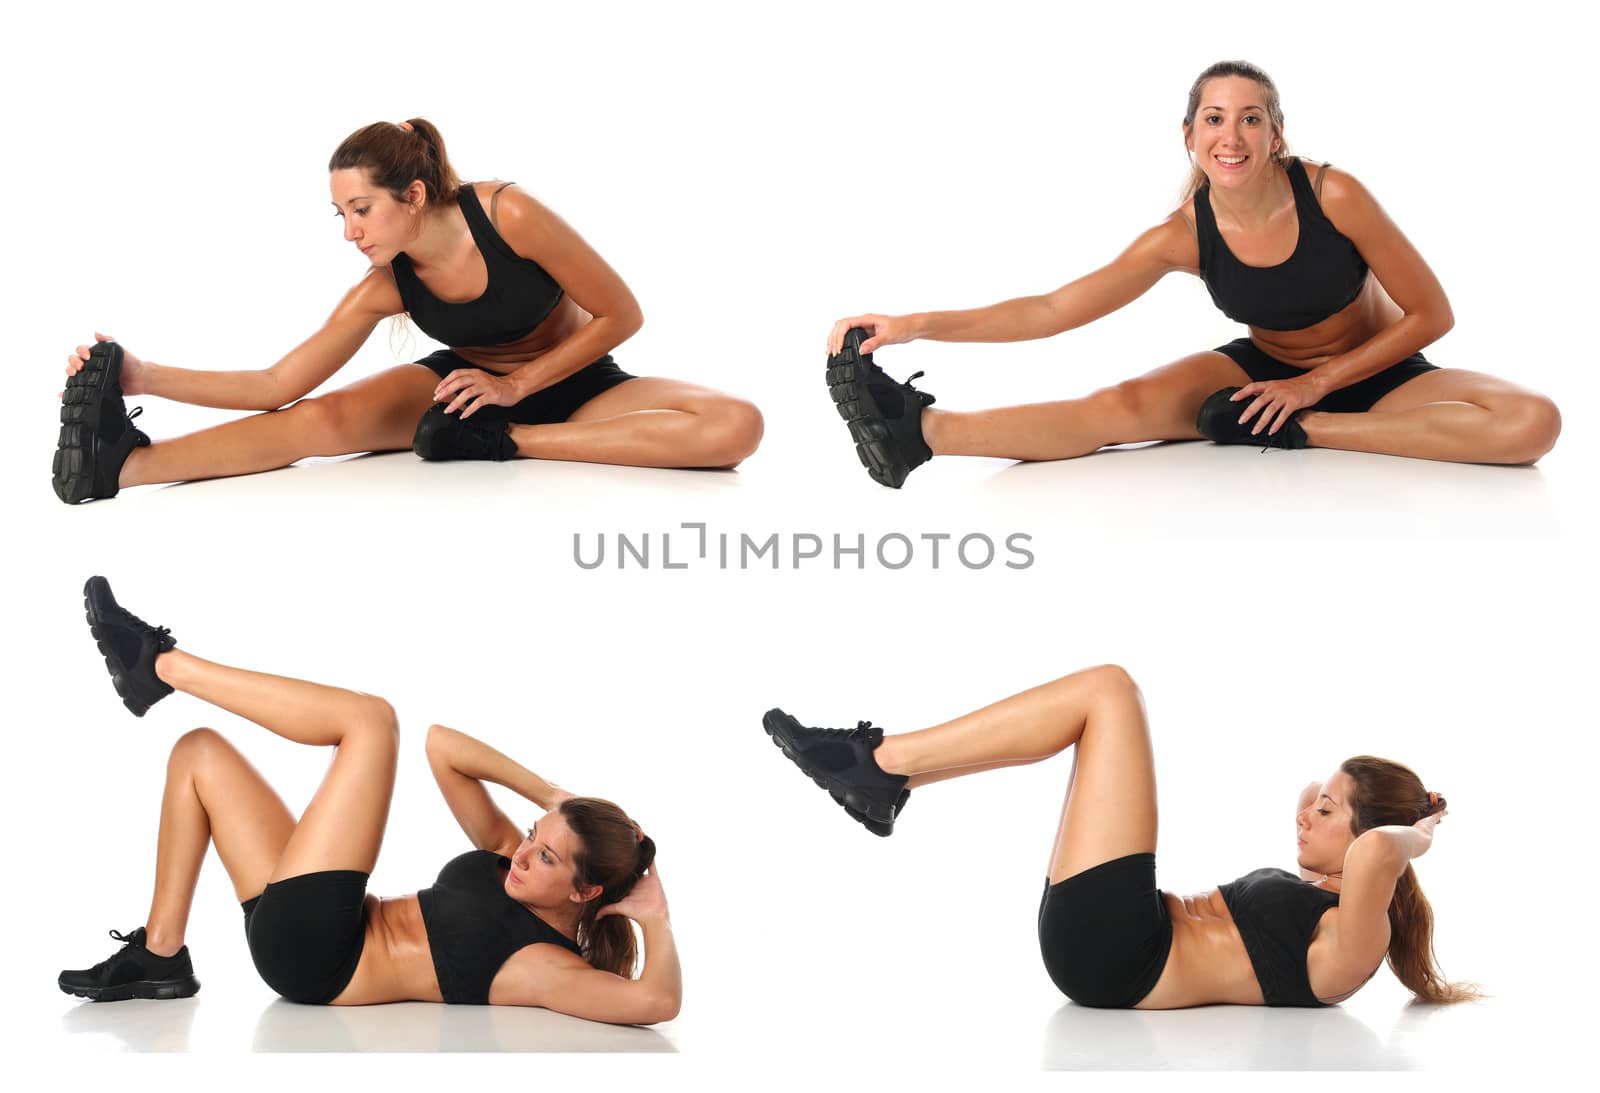 Fitness collage. Young woman doing exercise and  stretching over white